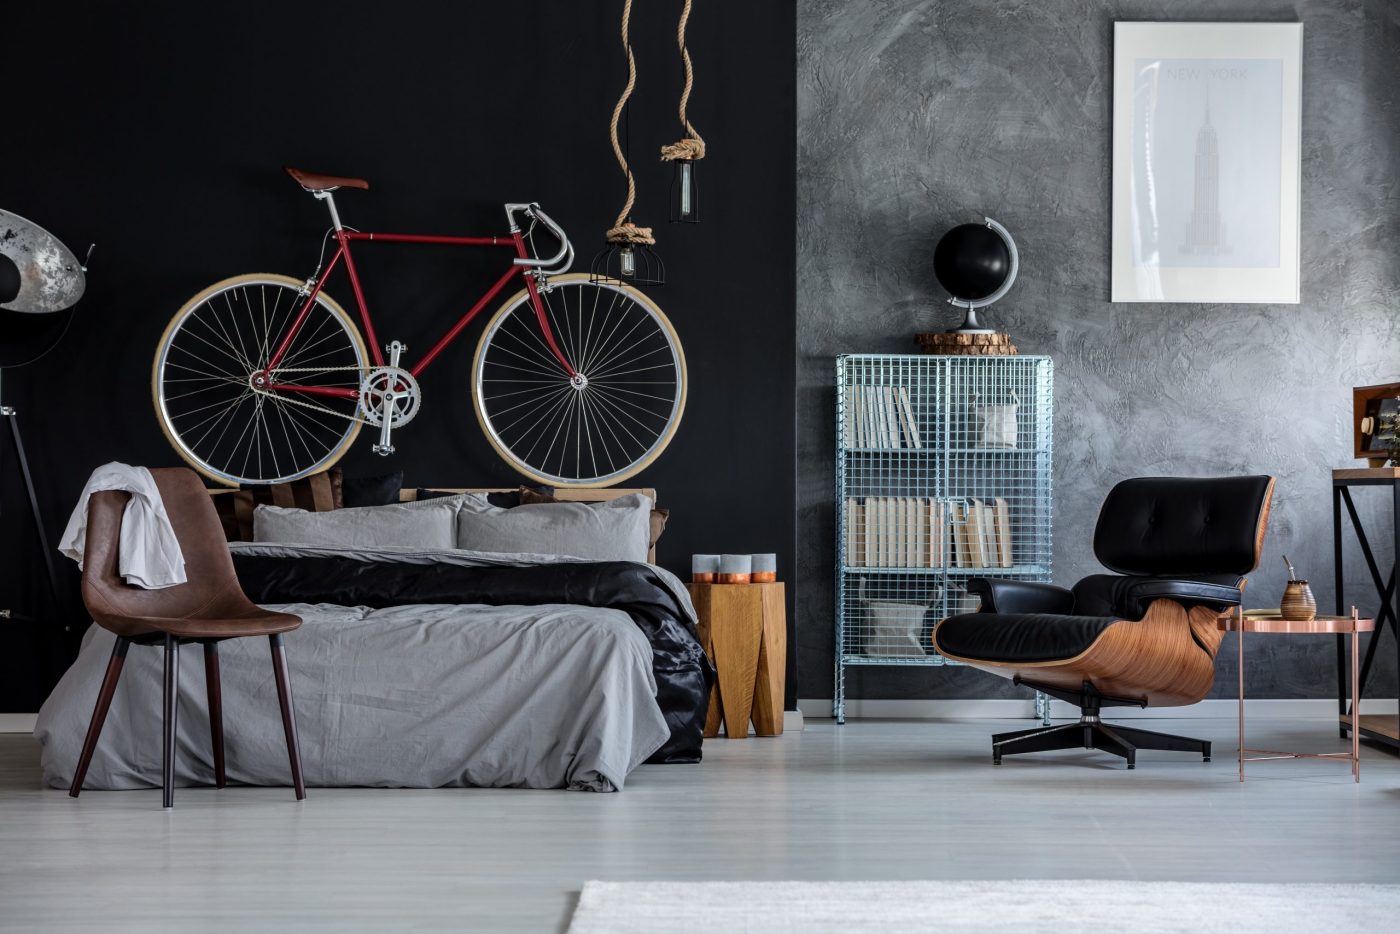 Modern designed bedroom with red bicycle above the bed